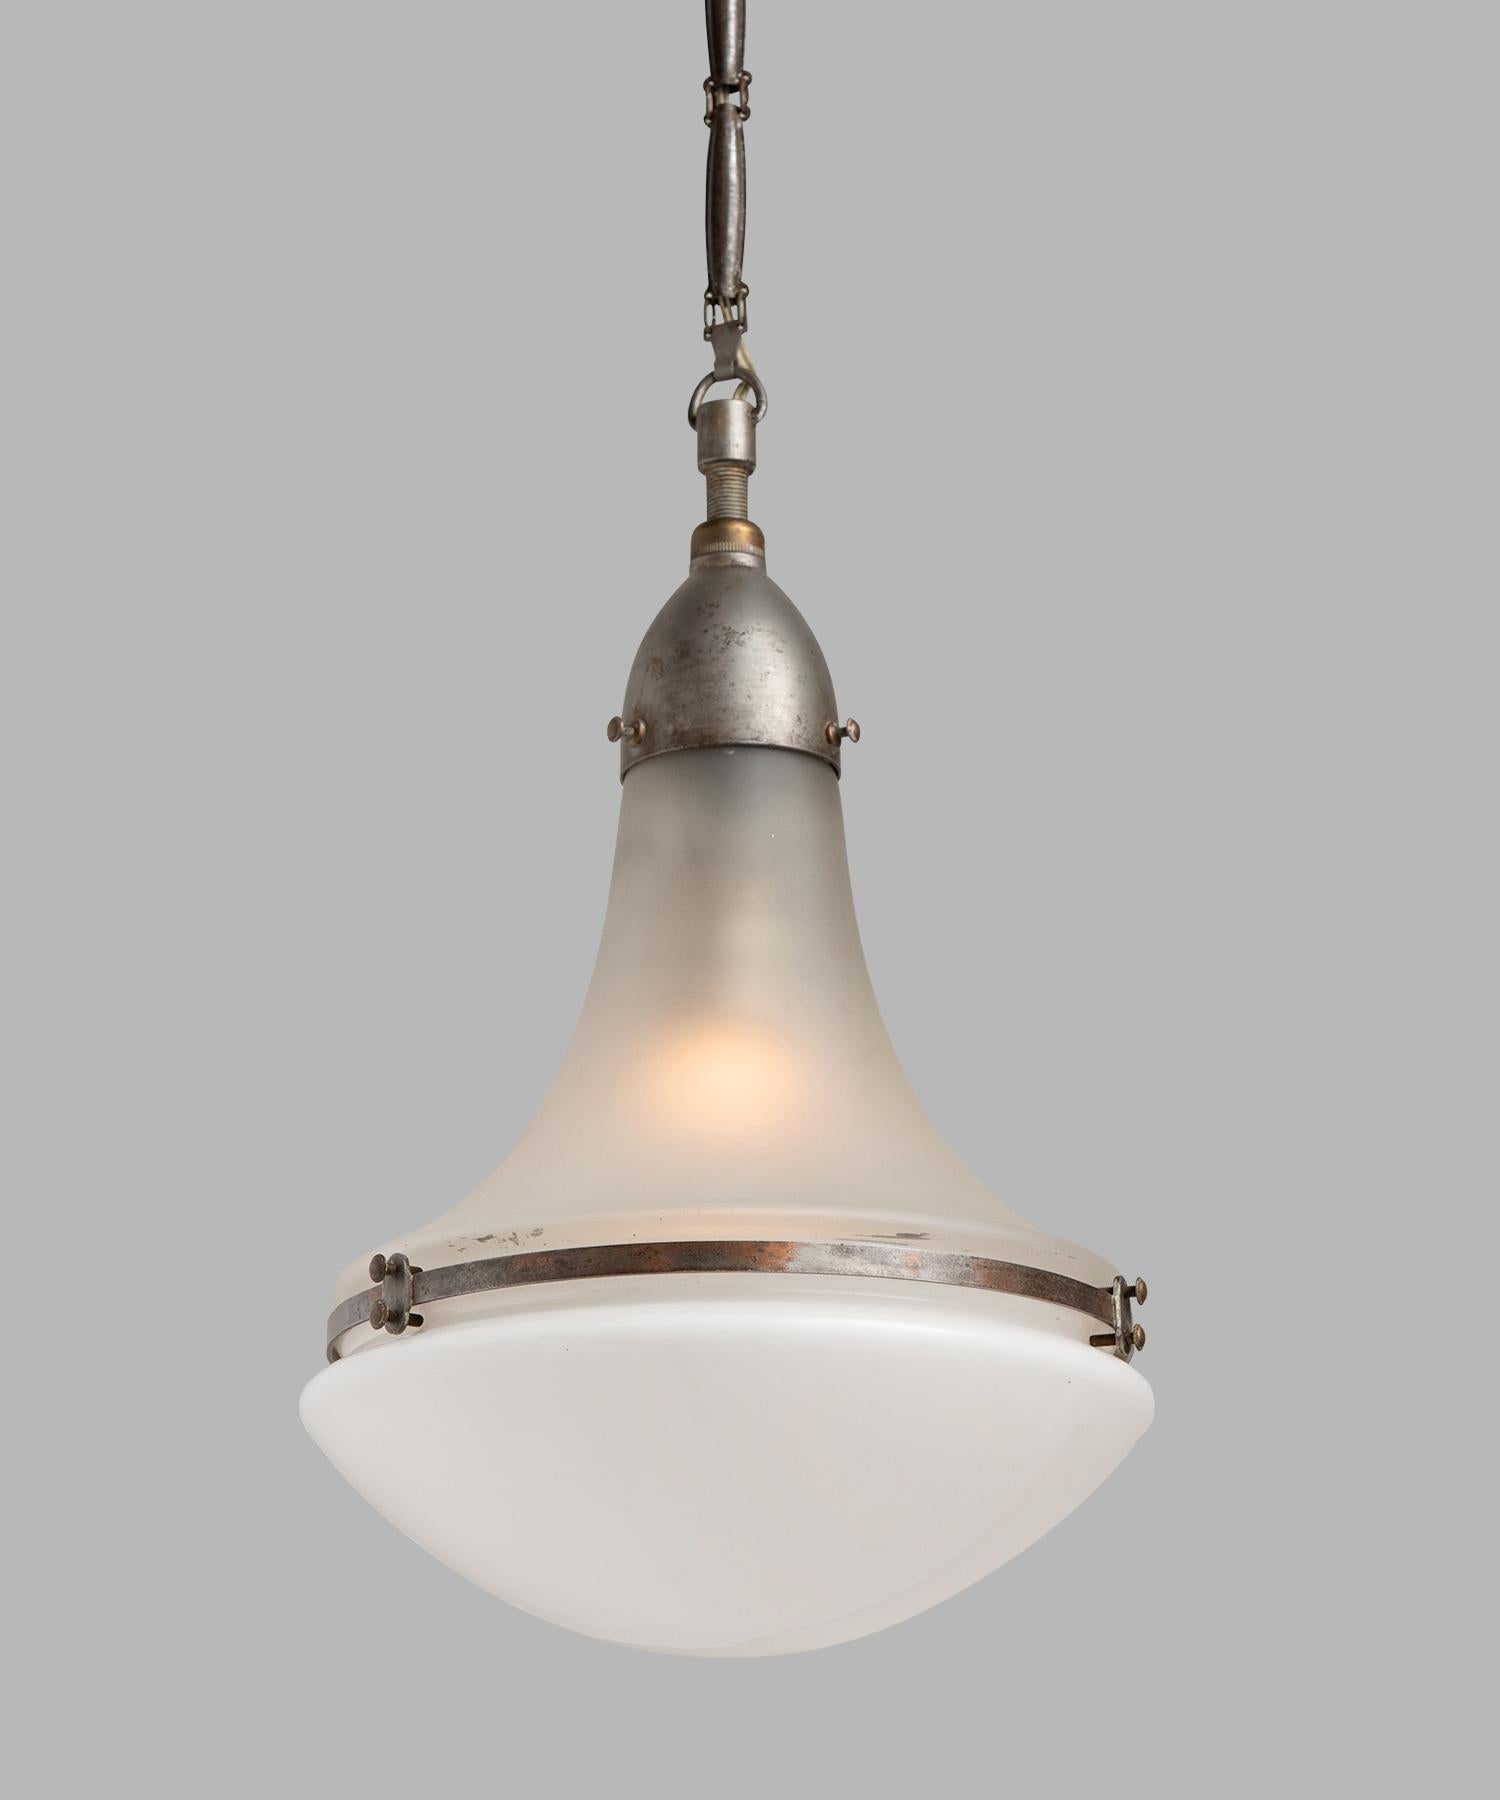 Peter Behrens Luzette pendant, Germany, circa 1920.

Small pendant with frosted glass top and opaline glass bottom, secured with copper fitter and brace. Manufactured by AEG Siemens with manufacturer's mark.